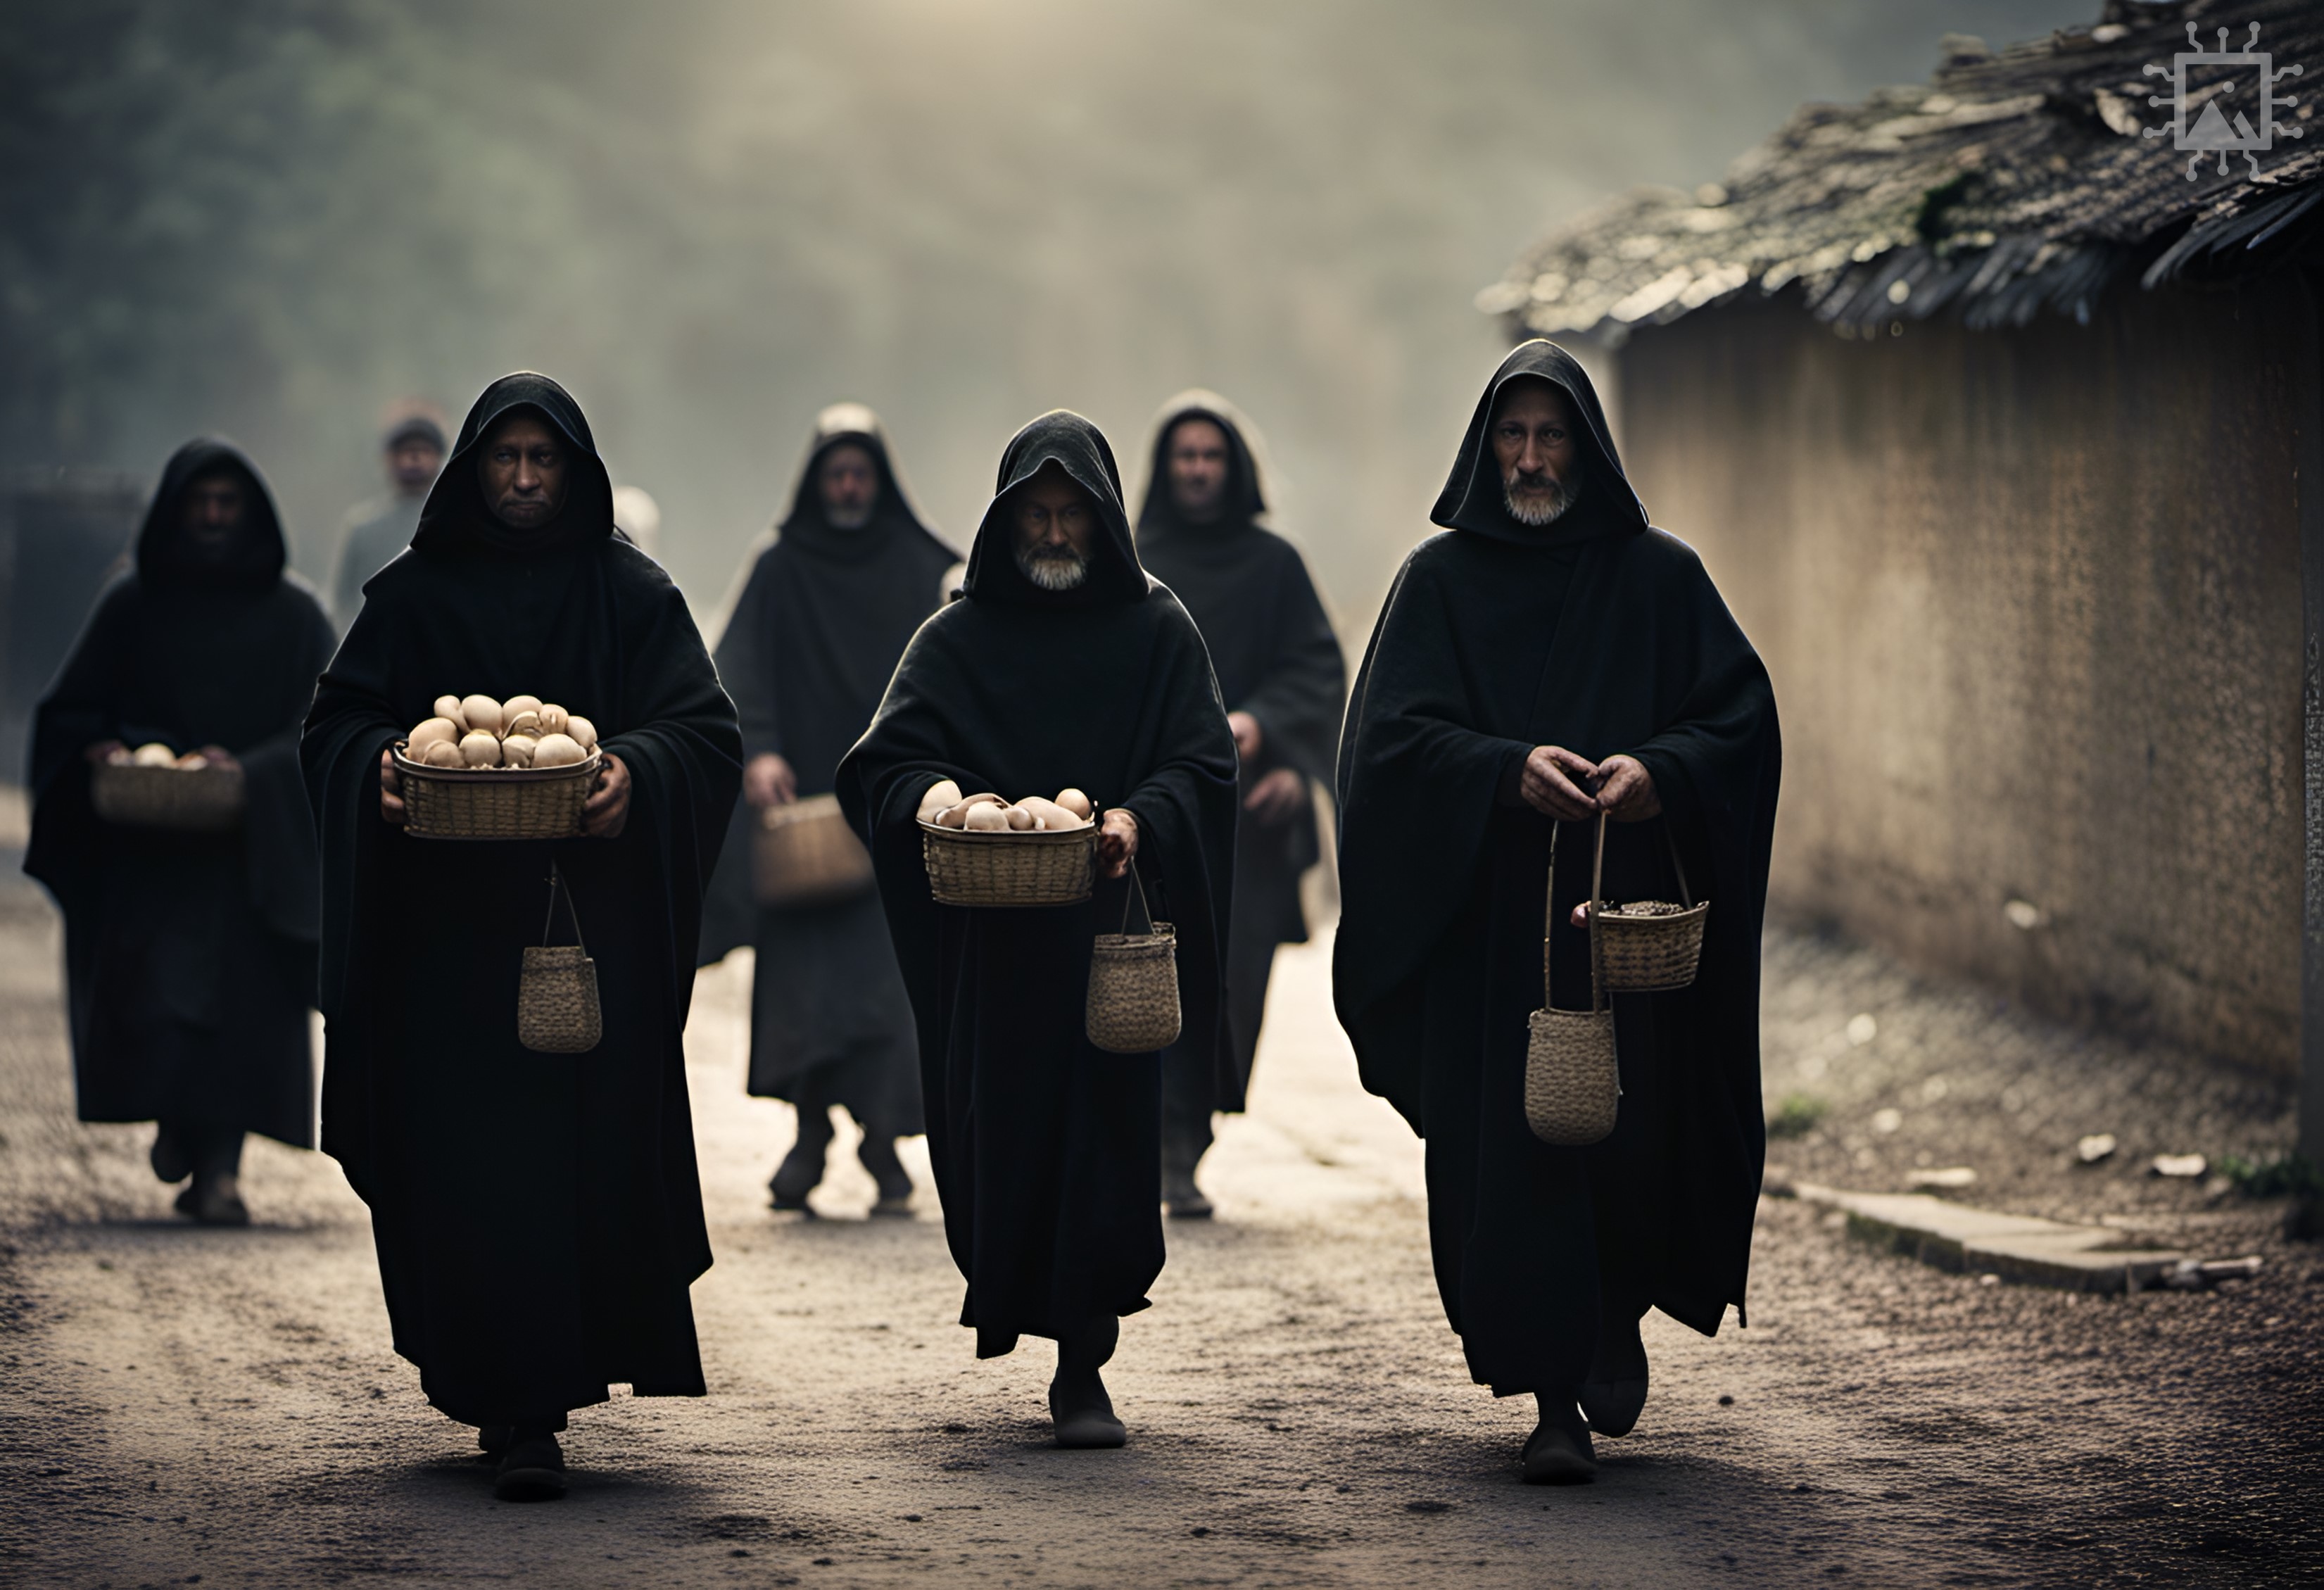 Artificial Intelligence-generated image produced using DreamStudio [accessed 13-08-2023]: ‘Early medieval Benedictine monks in black robes distributing alms to the poor.’ Find out more: rochestercathedral.org/research/ai